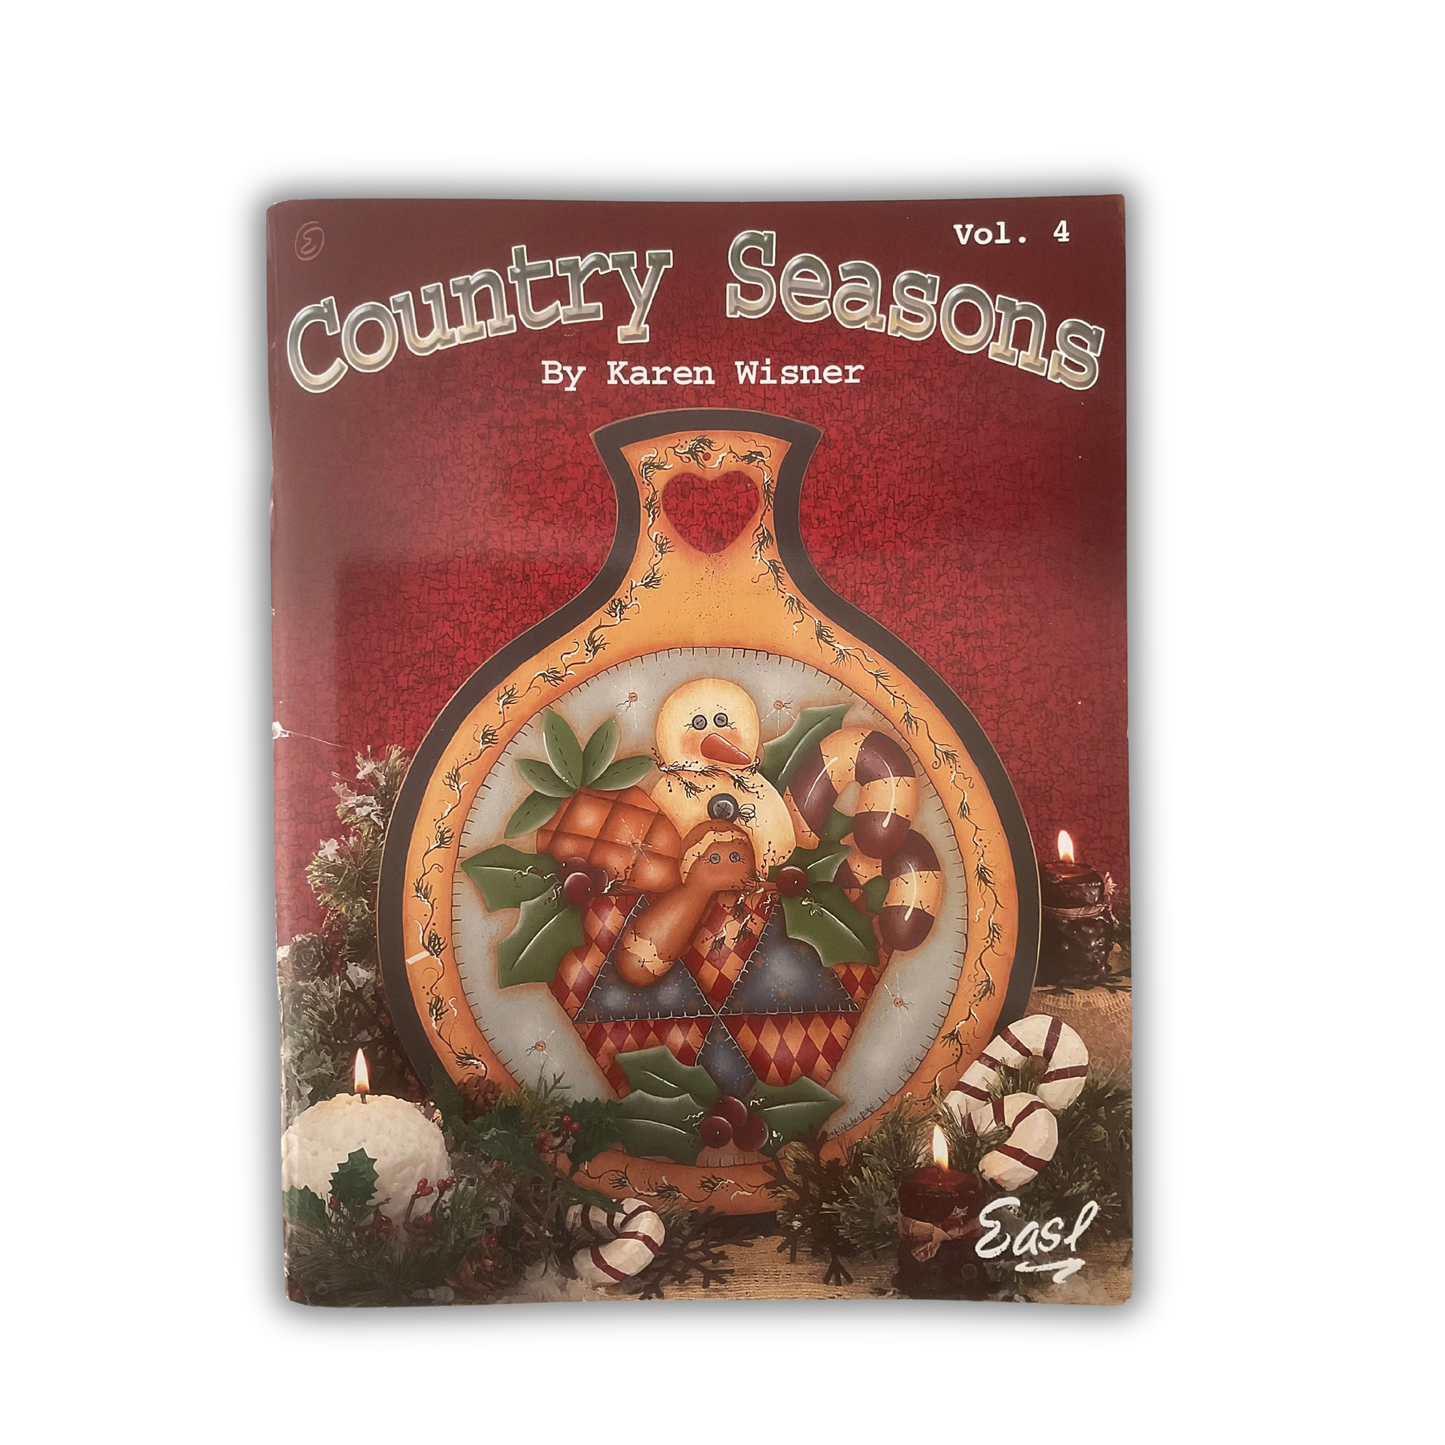 Country seasons by Karen Wisner Out of the Wood